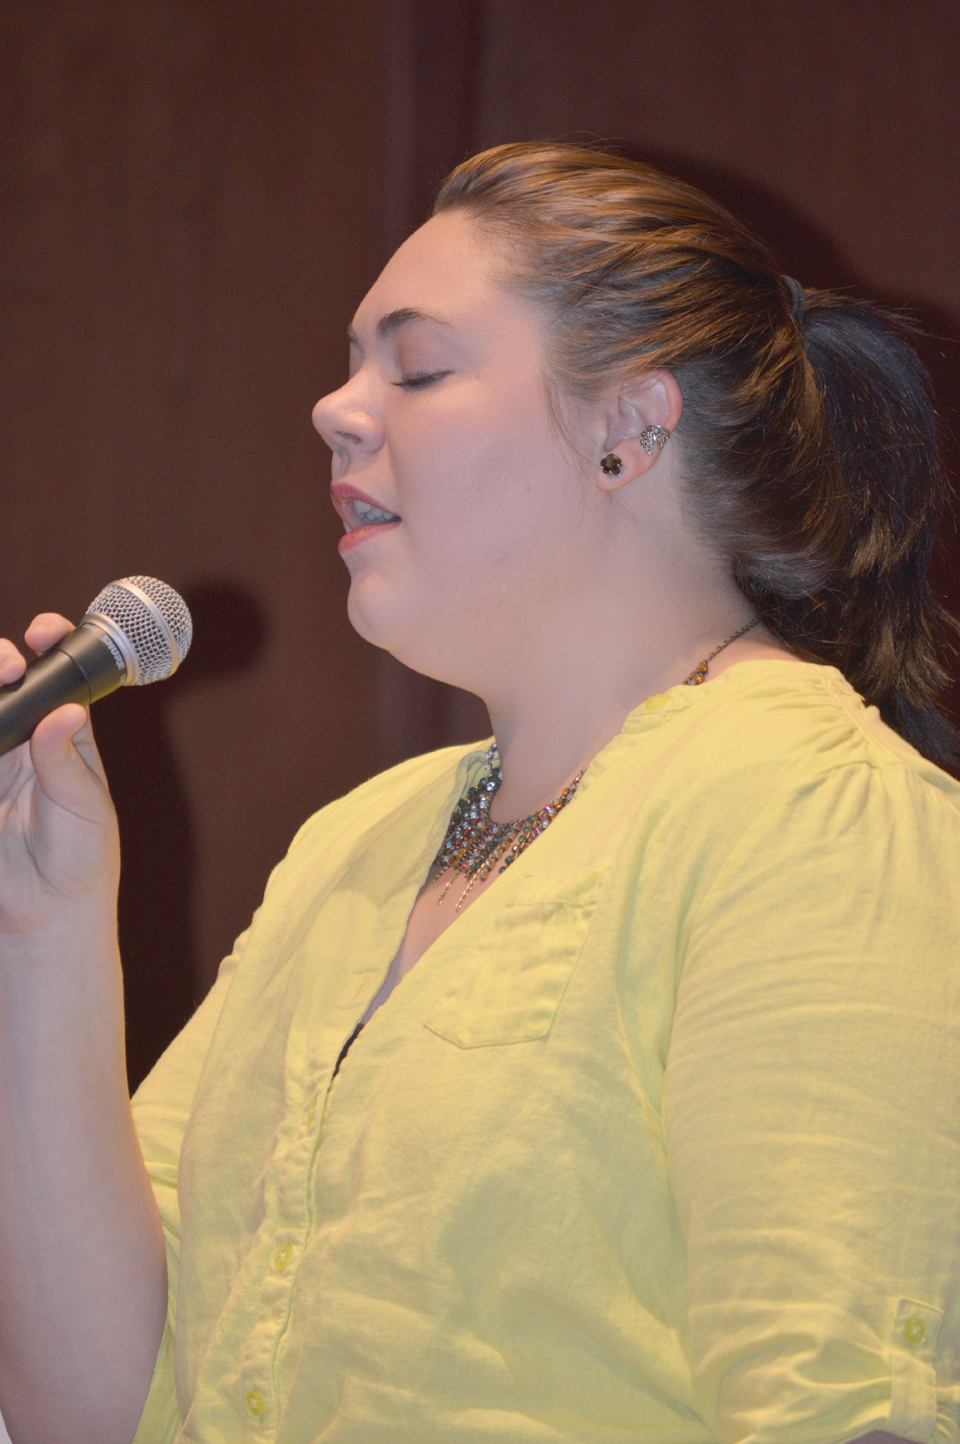 Marissa Wilson of the Peninsula College Vocal Jazz Ensemble will offer “A Song for You” in Thursday's “Jazz for Oso” concert at Olympic Cellars winery in Port Angeles. Diane Urbani de la Paz/Peninsula Daily News